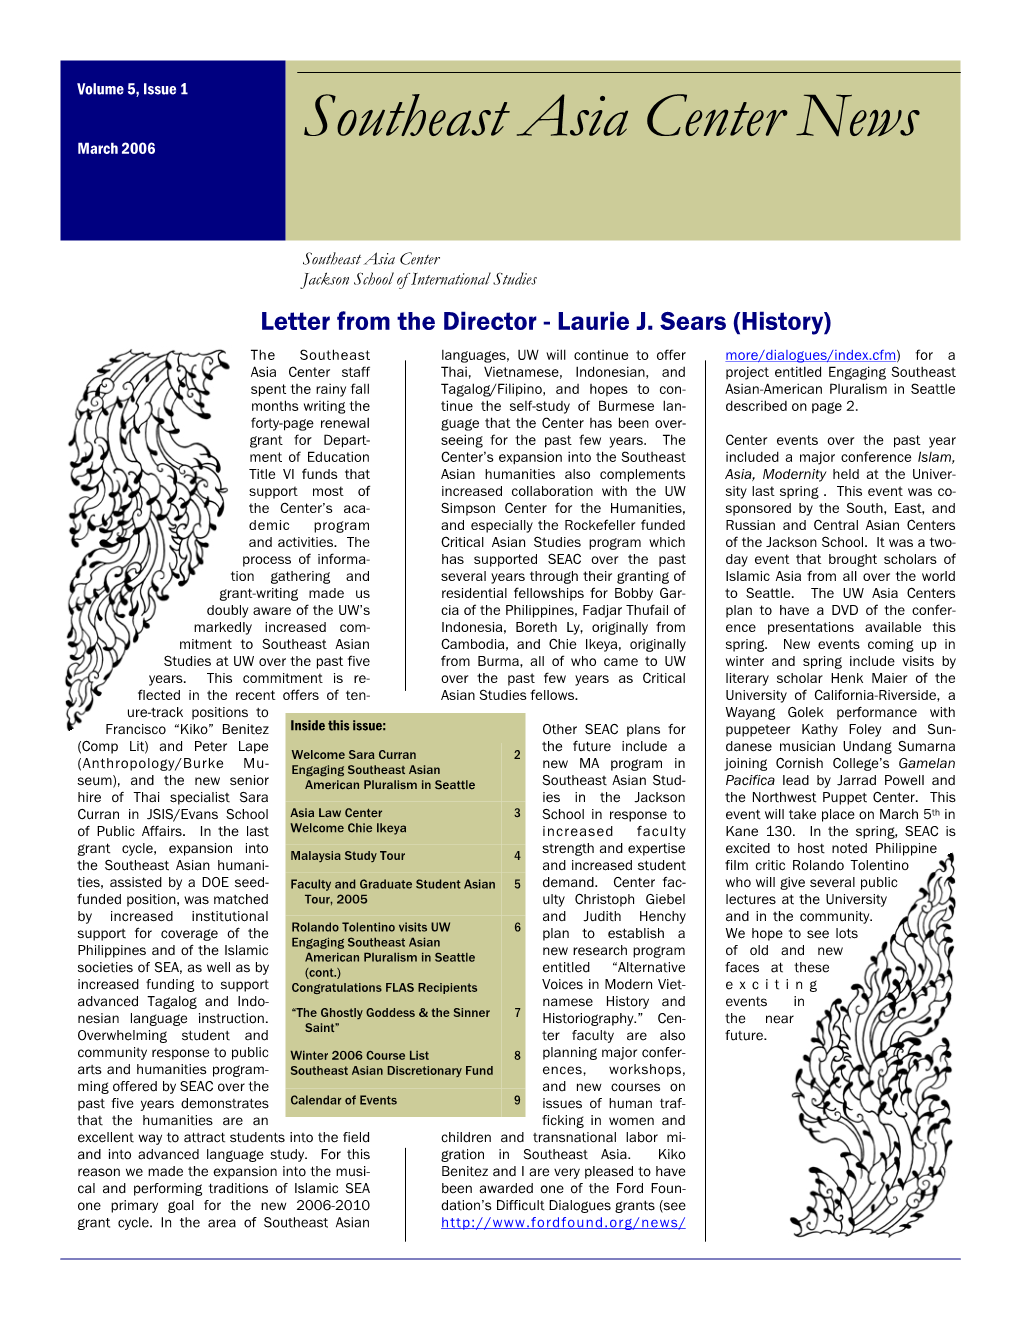 Southeast Asia Center News March 2006